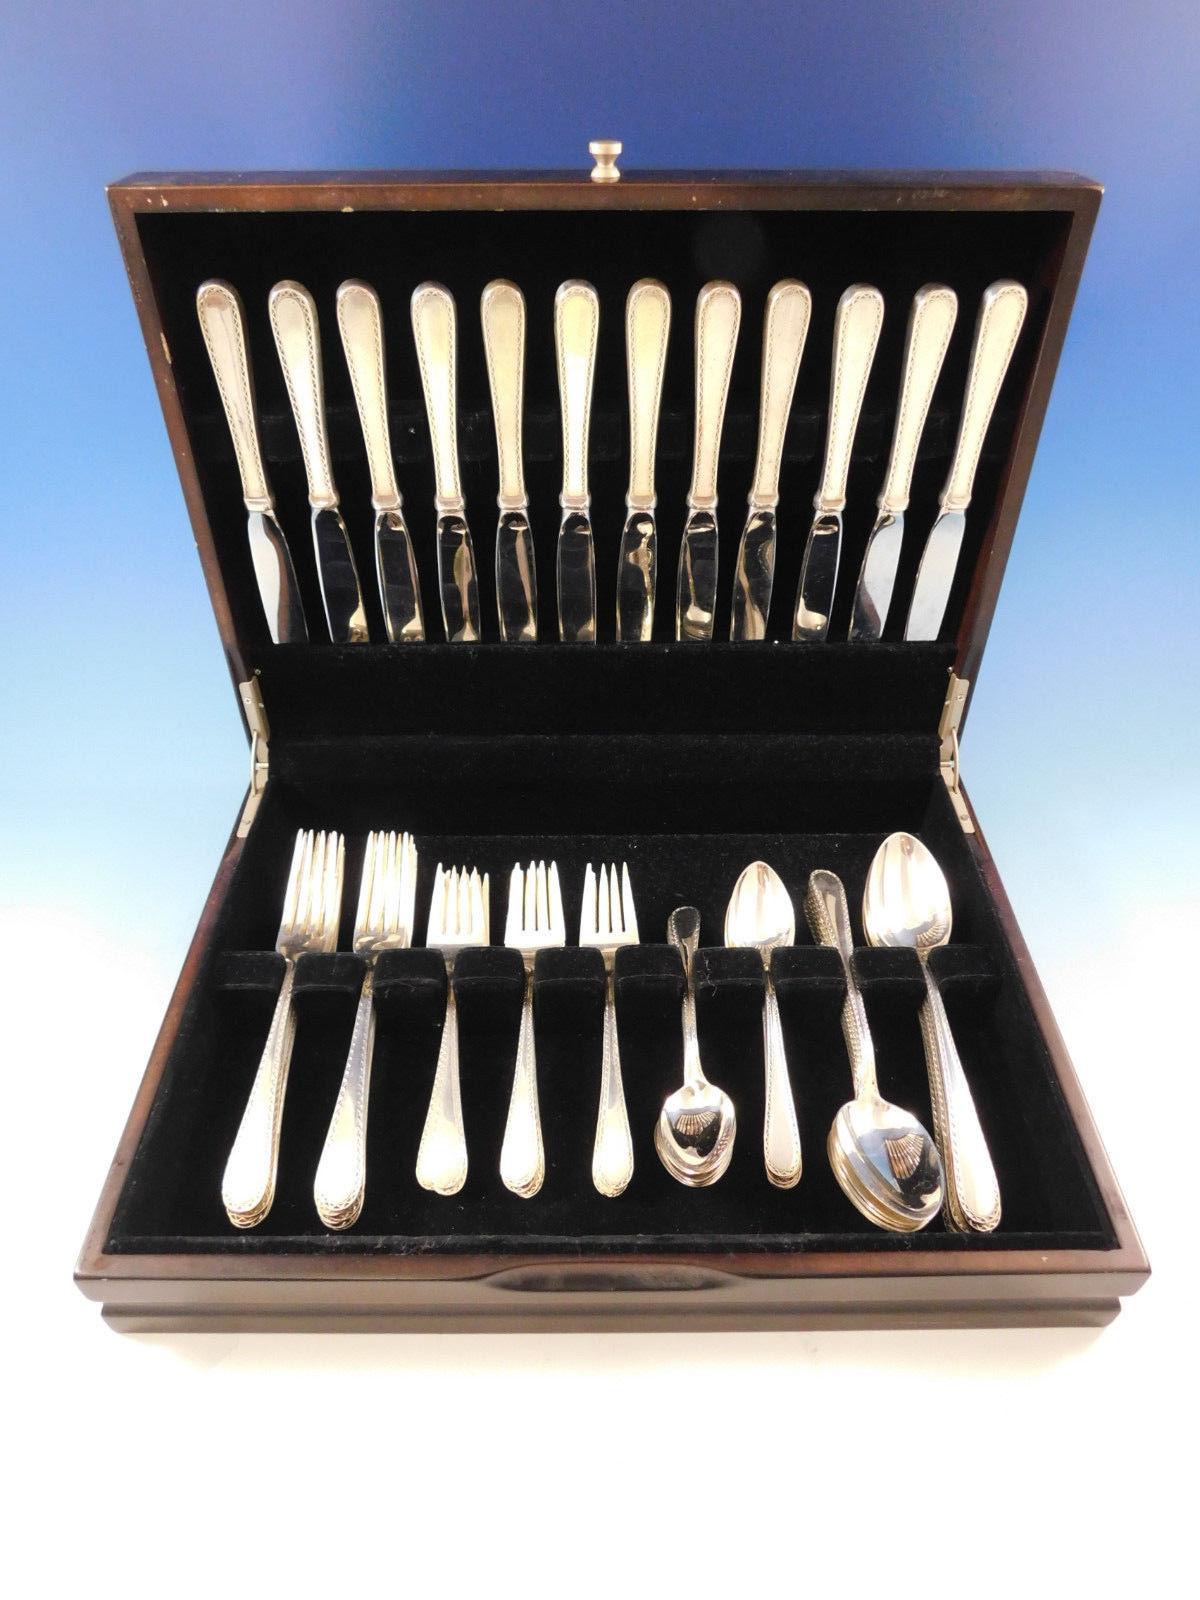 Winslow by Kirk-Stieff sterling silver flatware set, 60 pieces. This set includes:

12 knives, 9 1/4